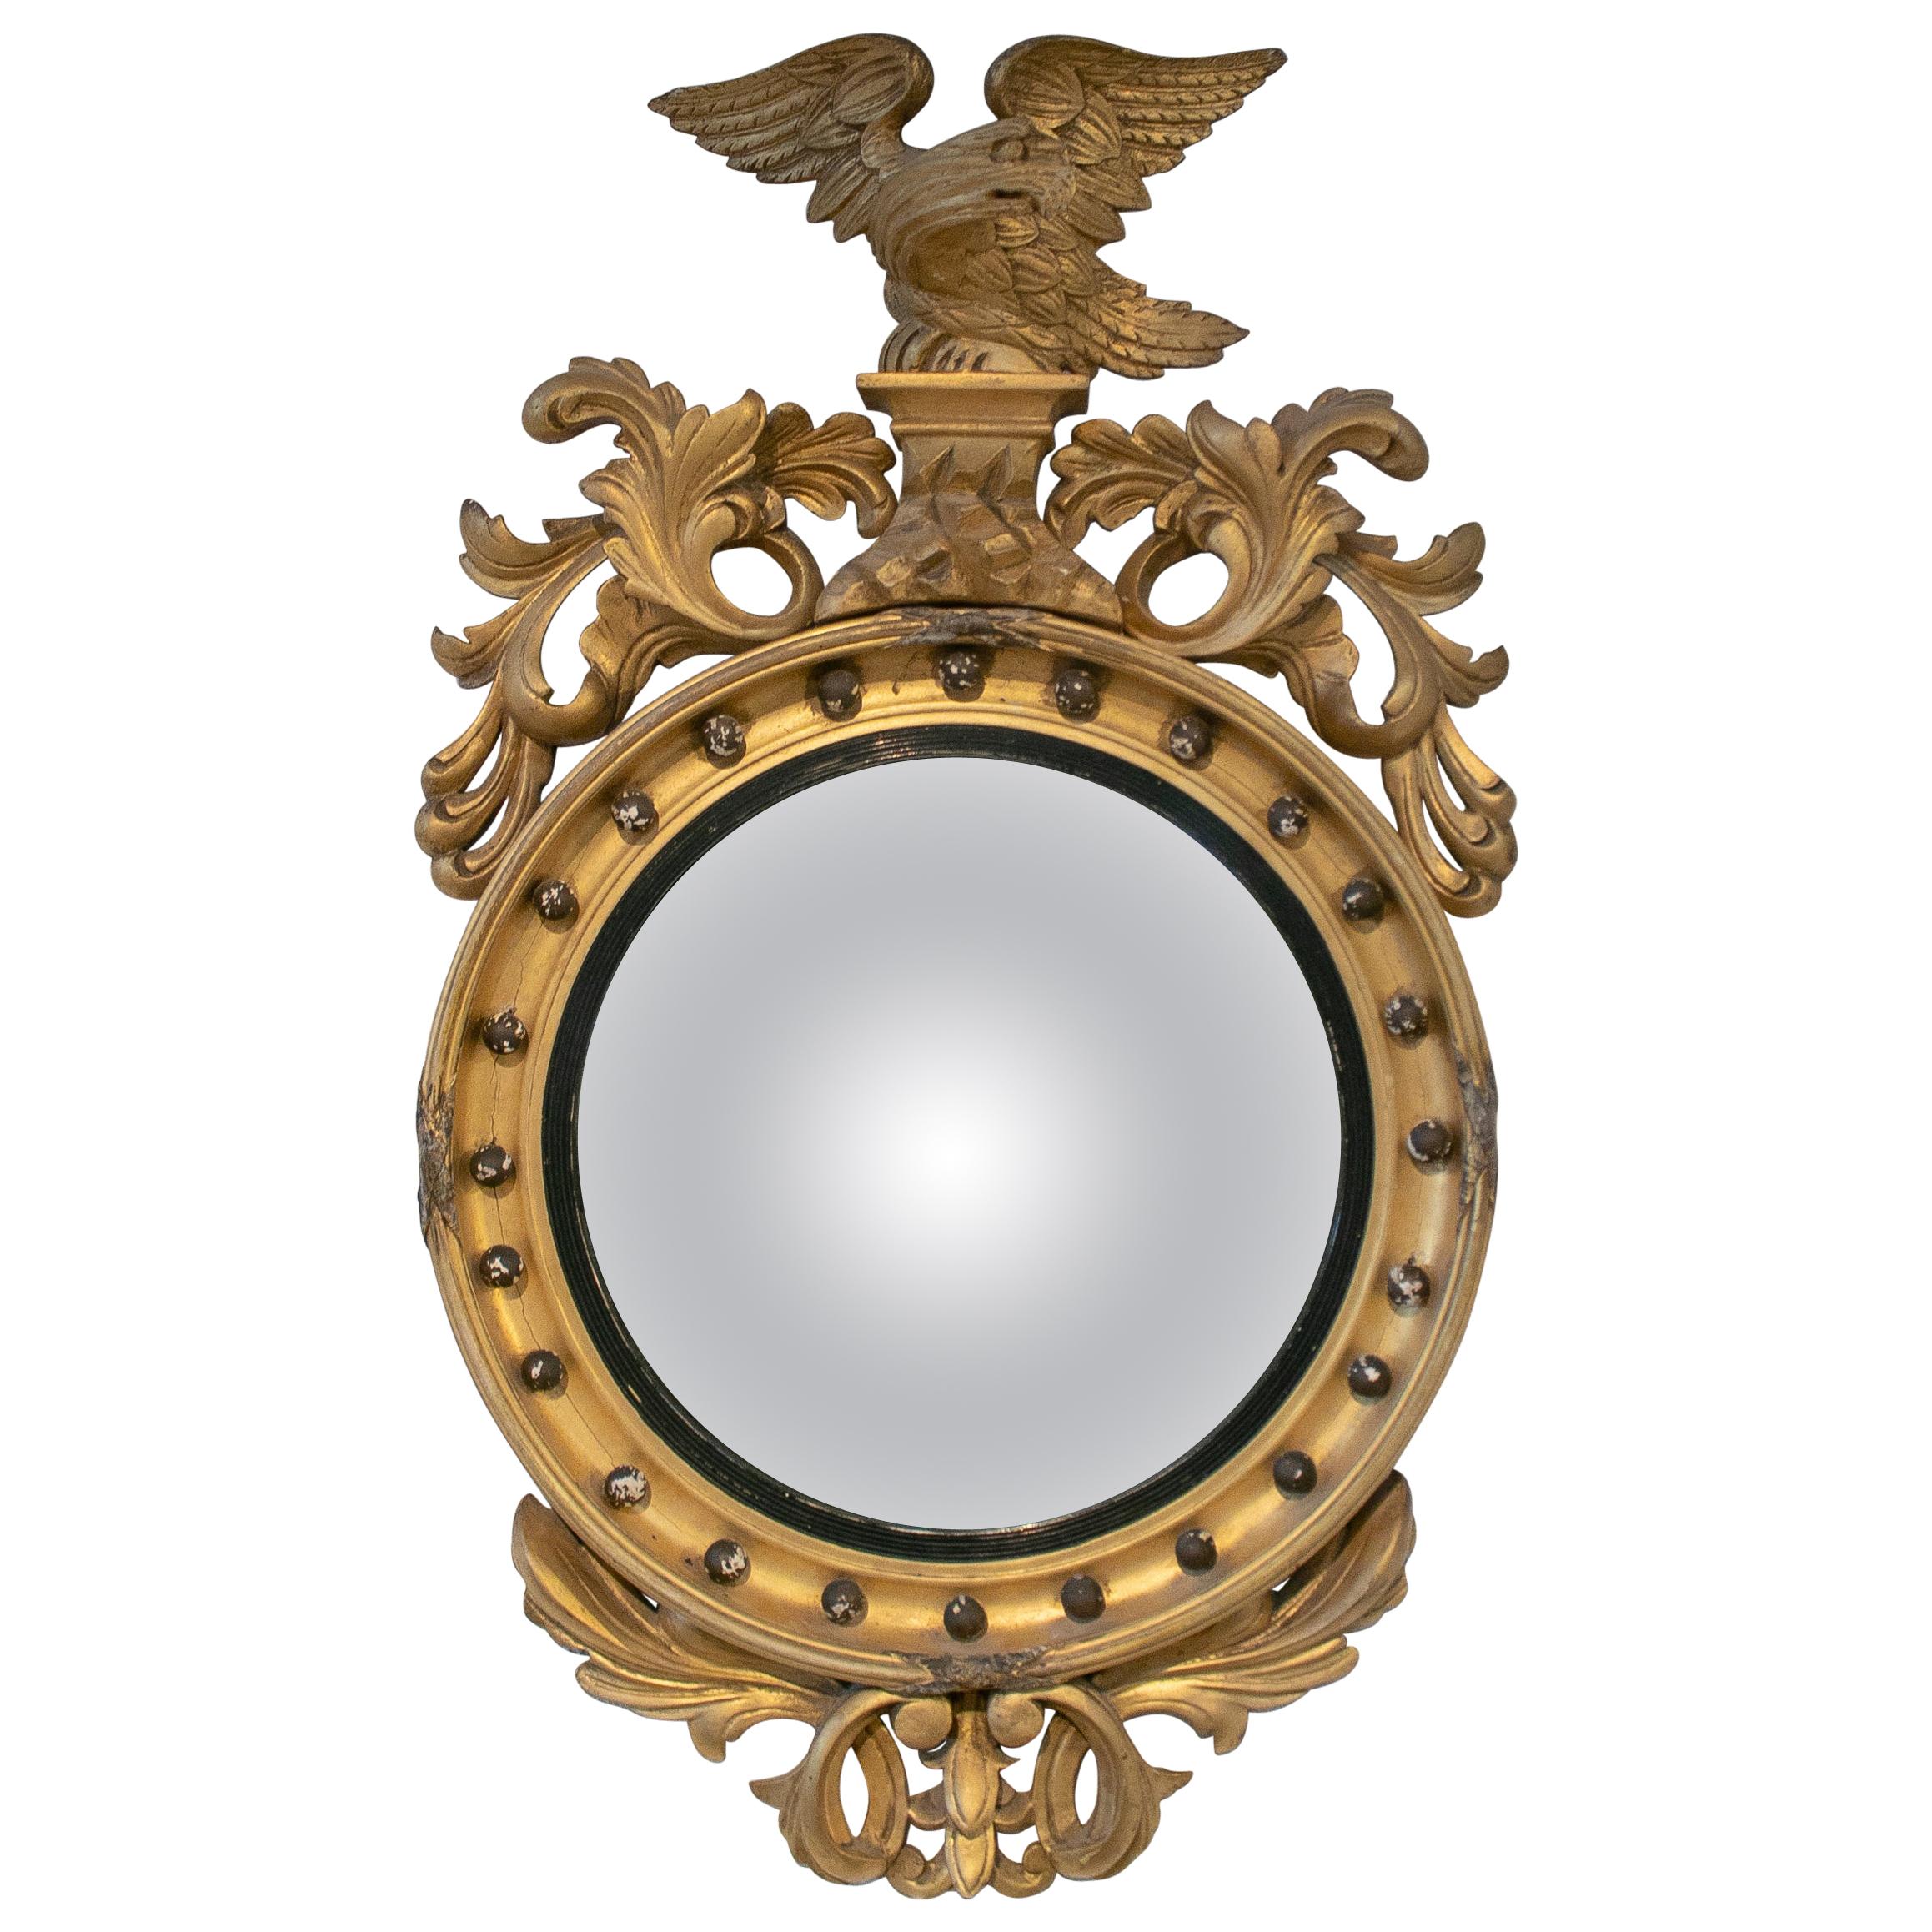 19th Century French Giltwood Framed Convex Mirror Crowned with Eagle